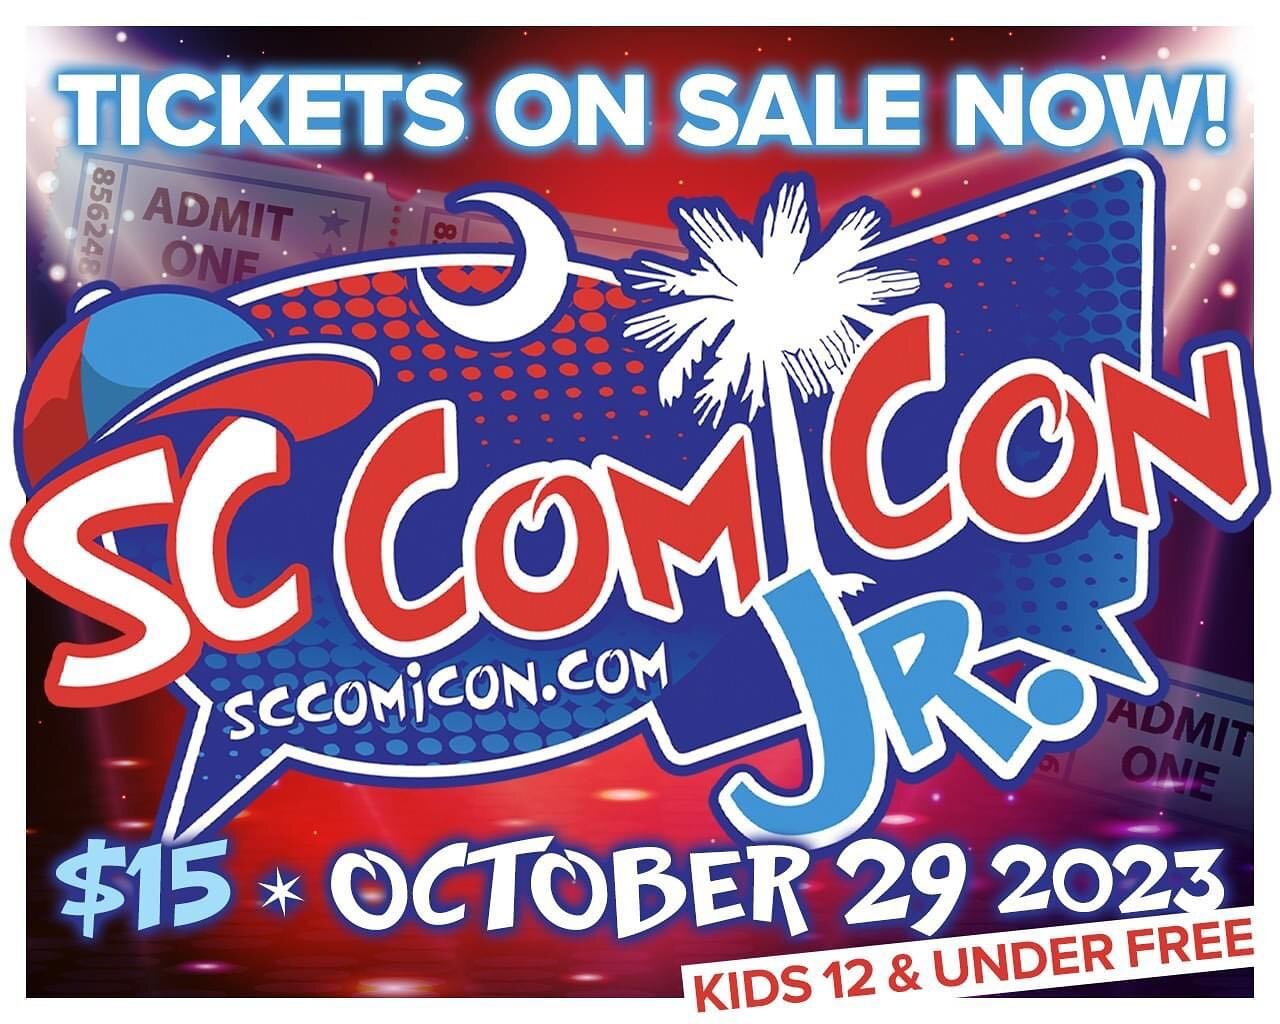 Y&rsquo;all know the deal by now! Tickets are on sale for SC Comicon Jr! We will be there October 29th for the best single day show in SC. See you there!